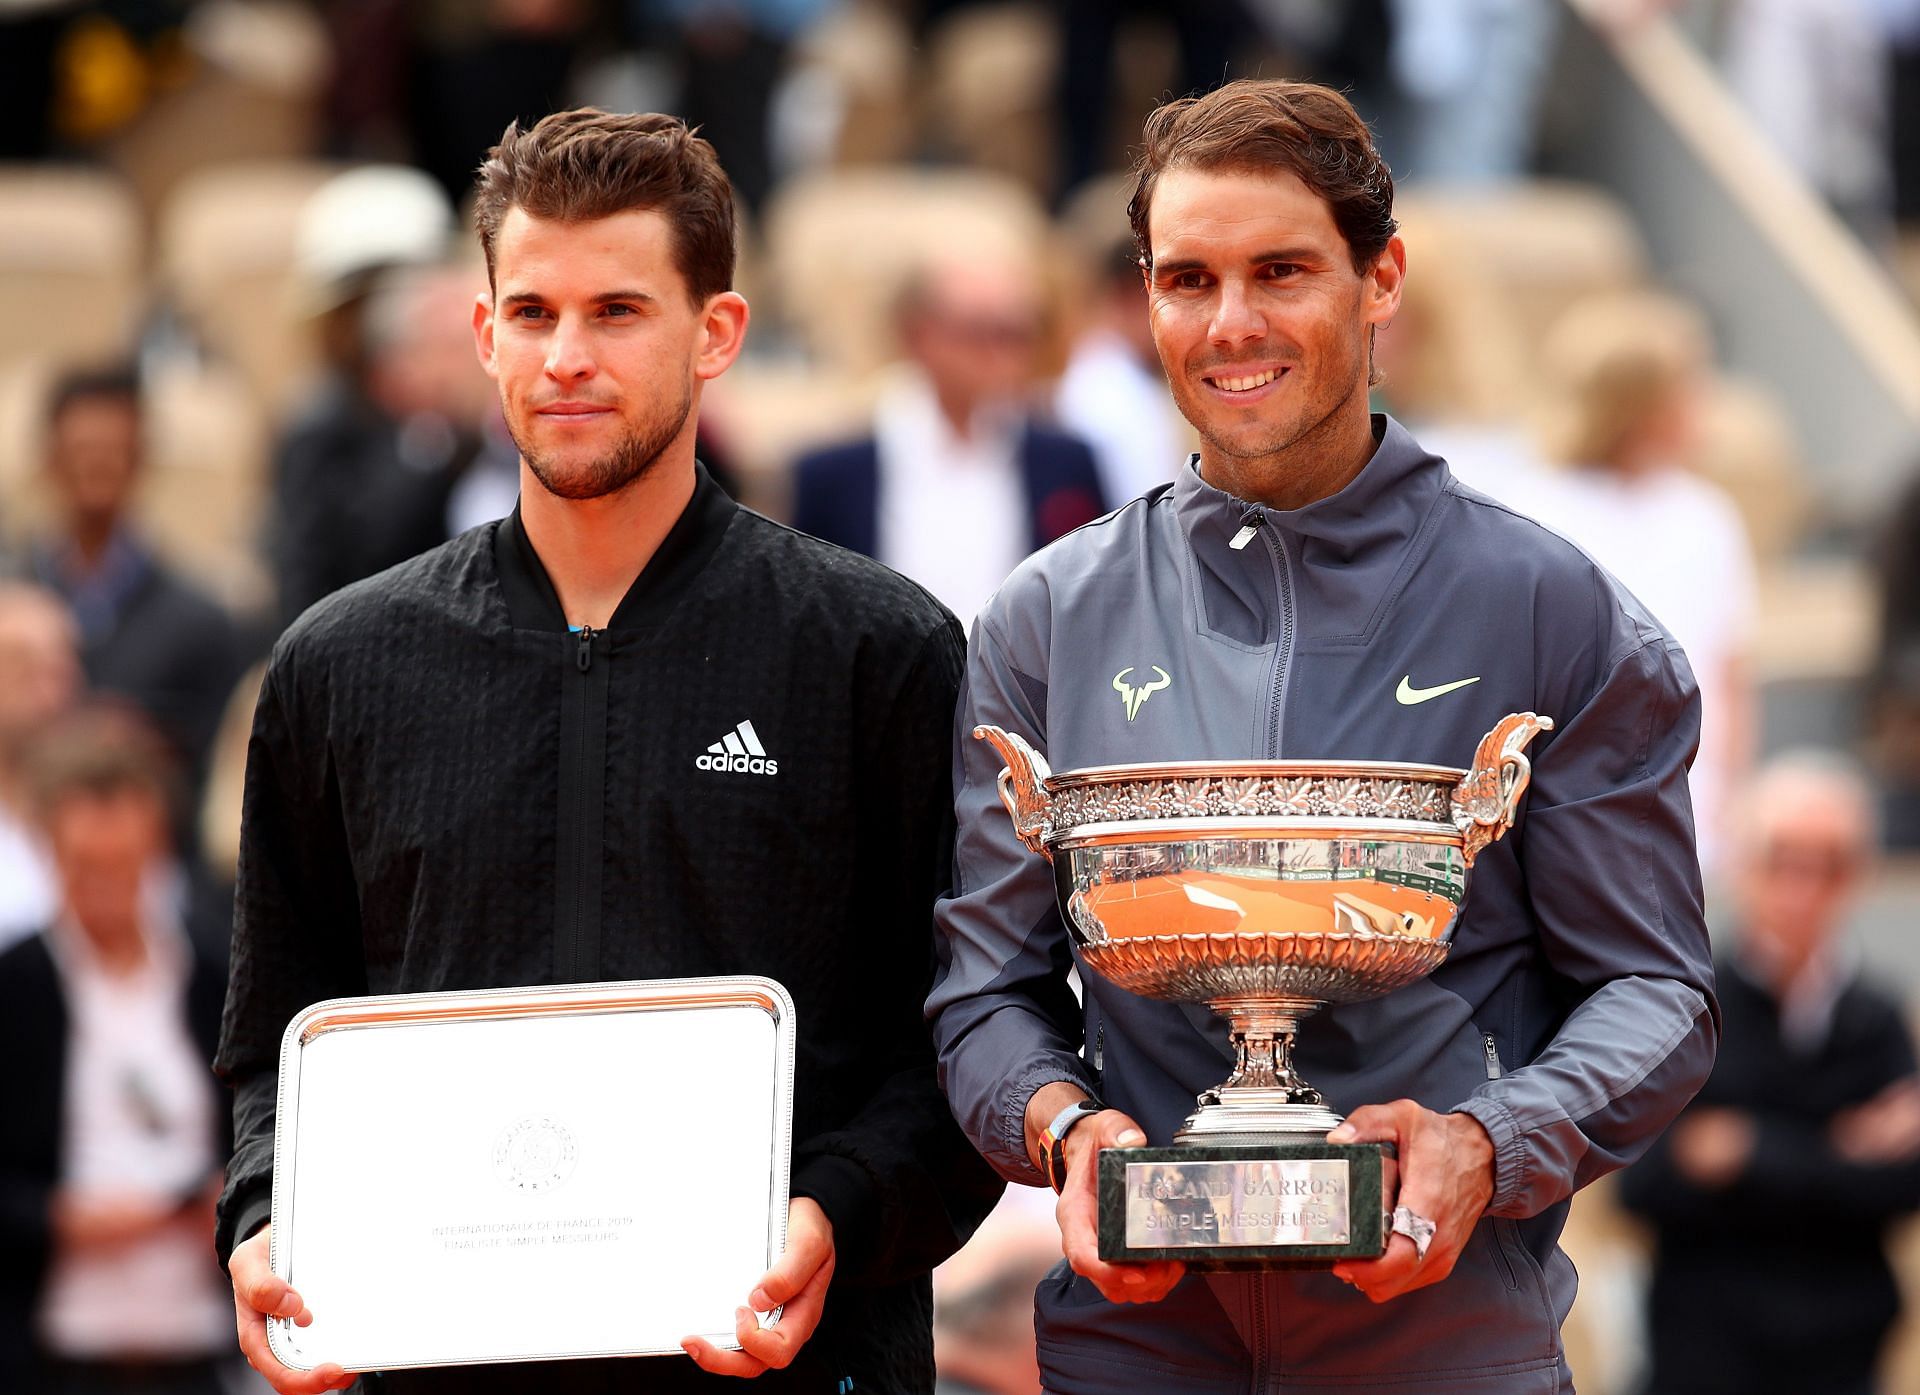 Dominic Thiem (L) and Rafael Nadal at the 2019 French Open.